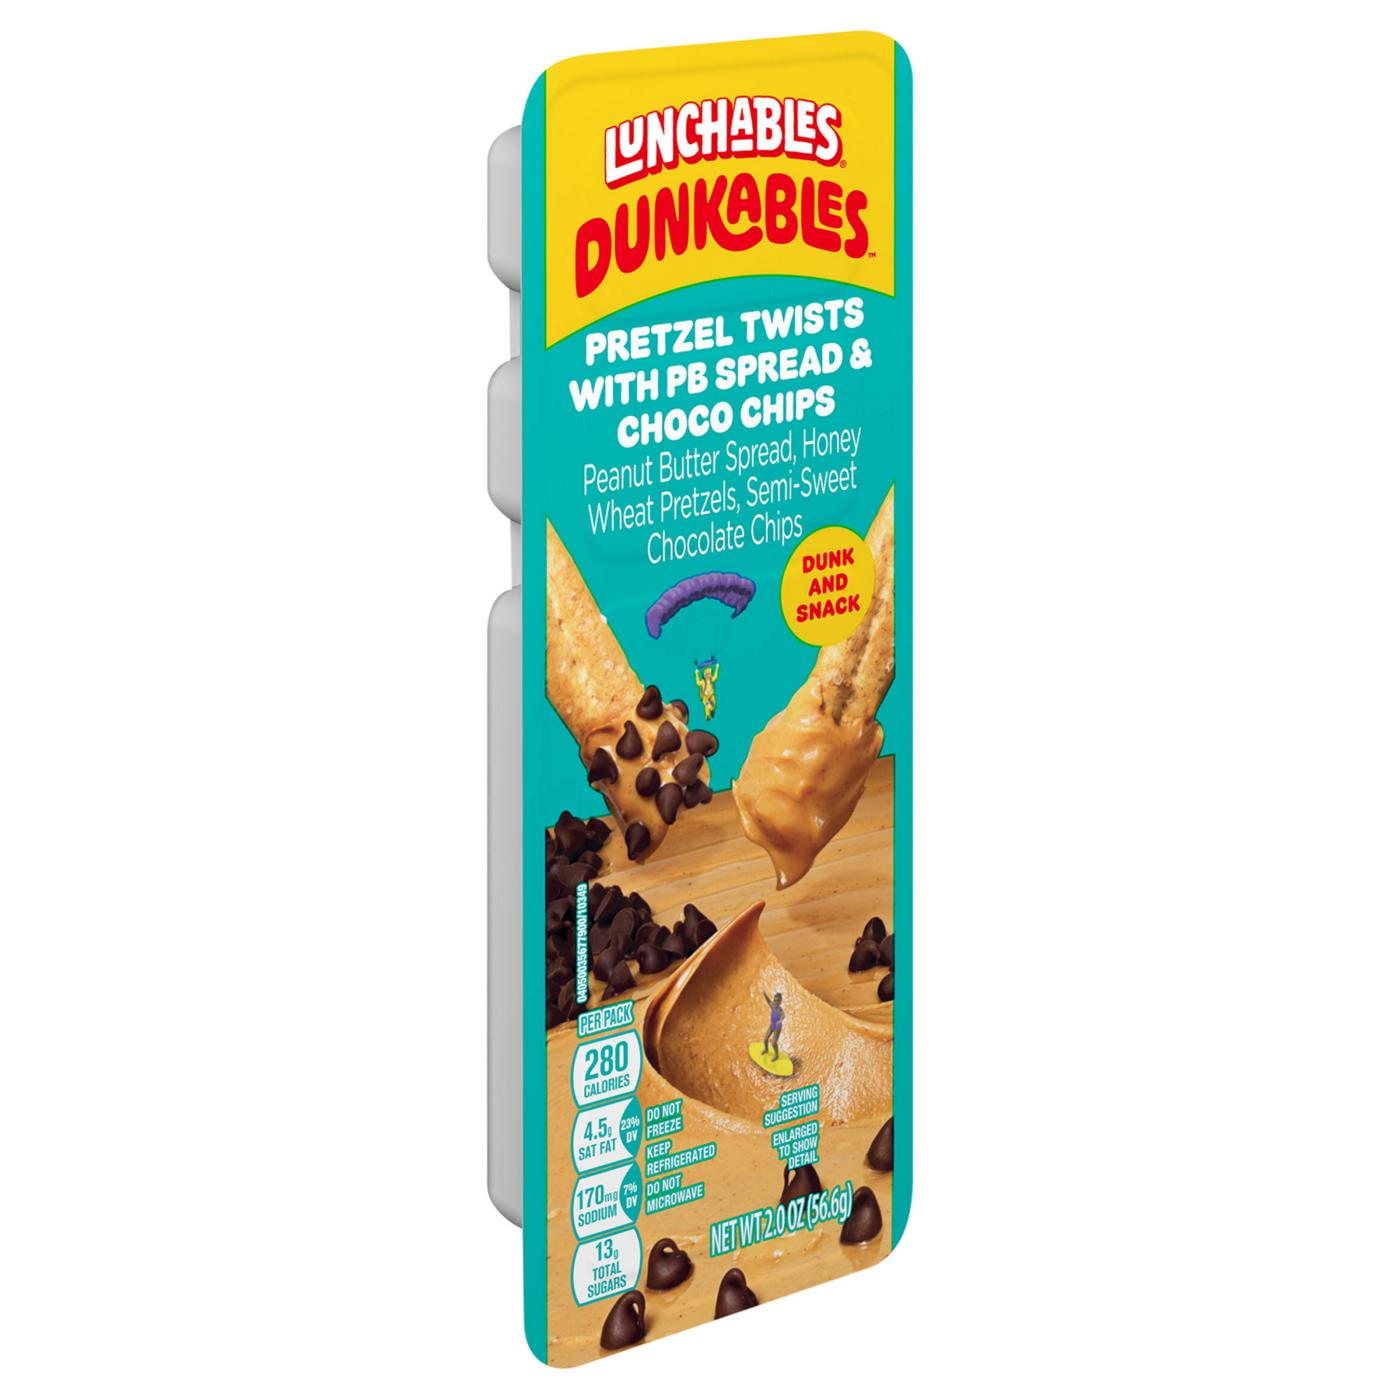 Lunchables Dunkables Snack Kit Tray - Pretzel Twists with PB Spread & Choco Chips; image 4 of 8